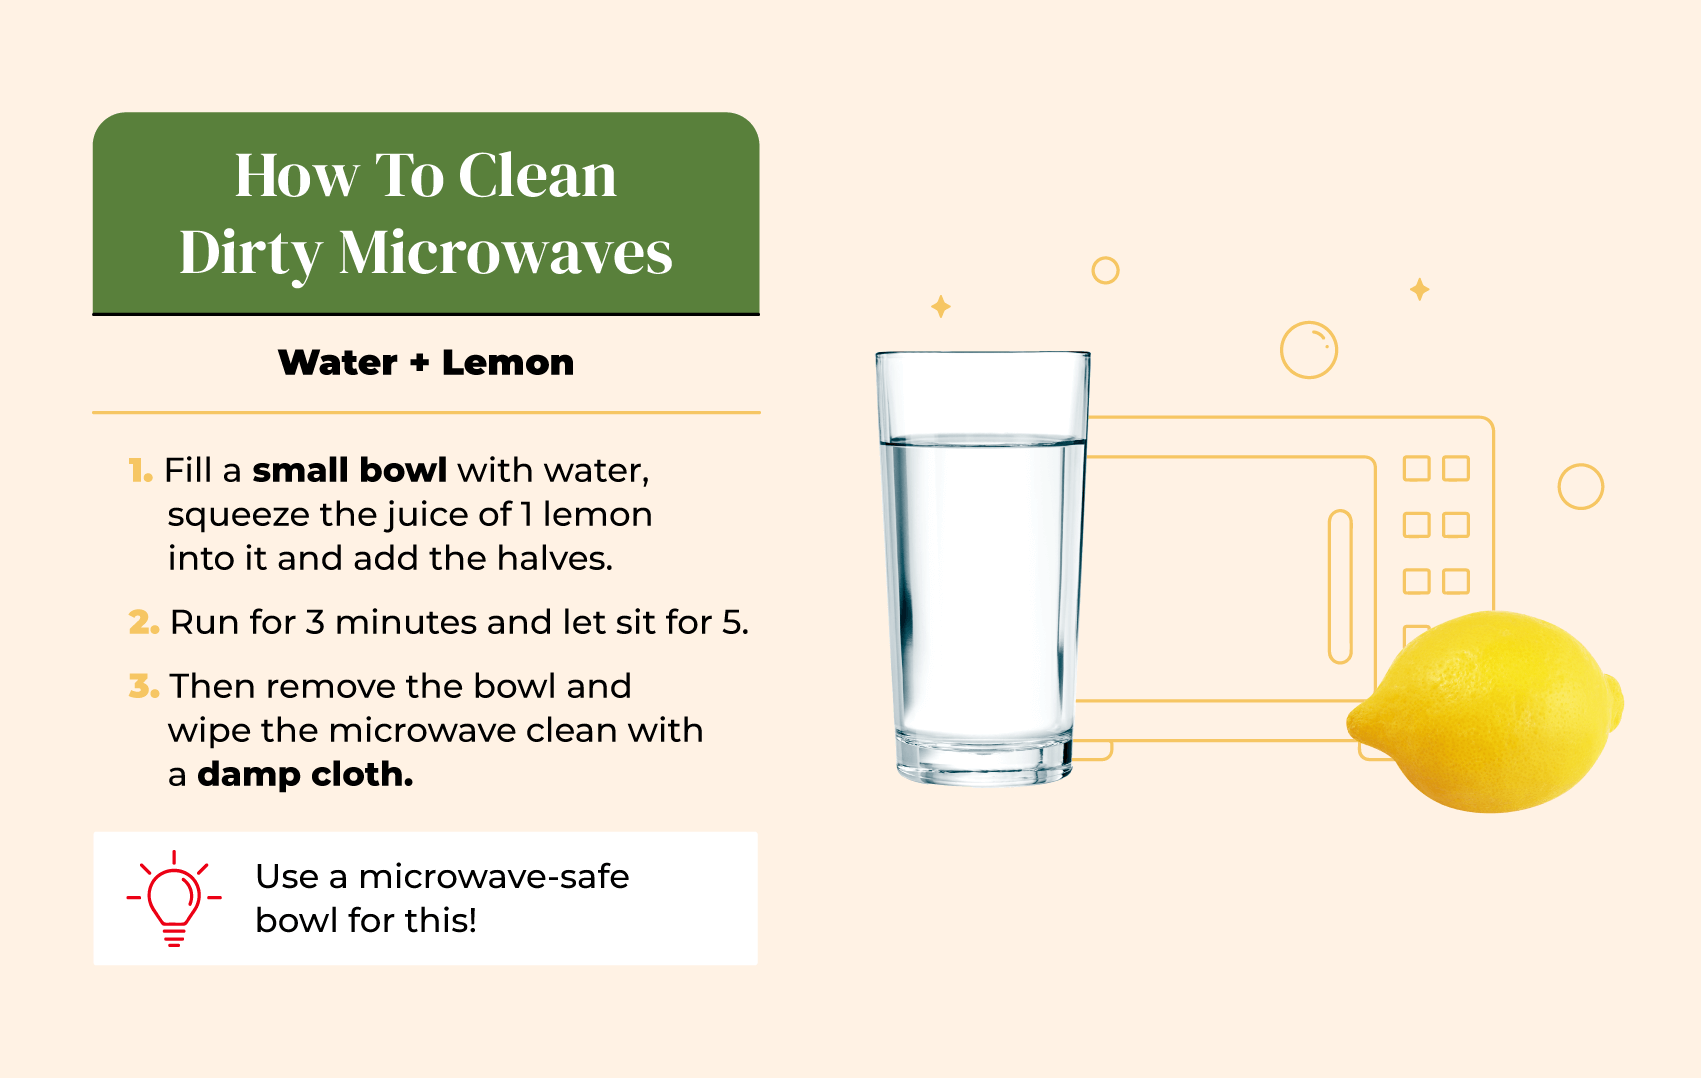 Eco-friendly cleaning hack for microwave using water and the juice of one lemon.